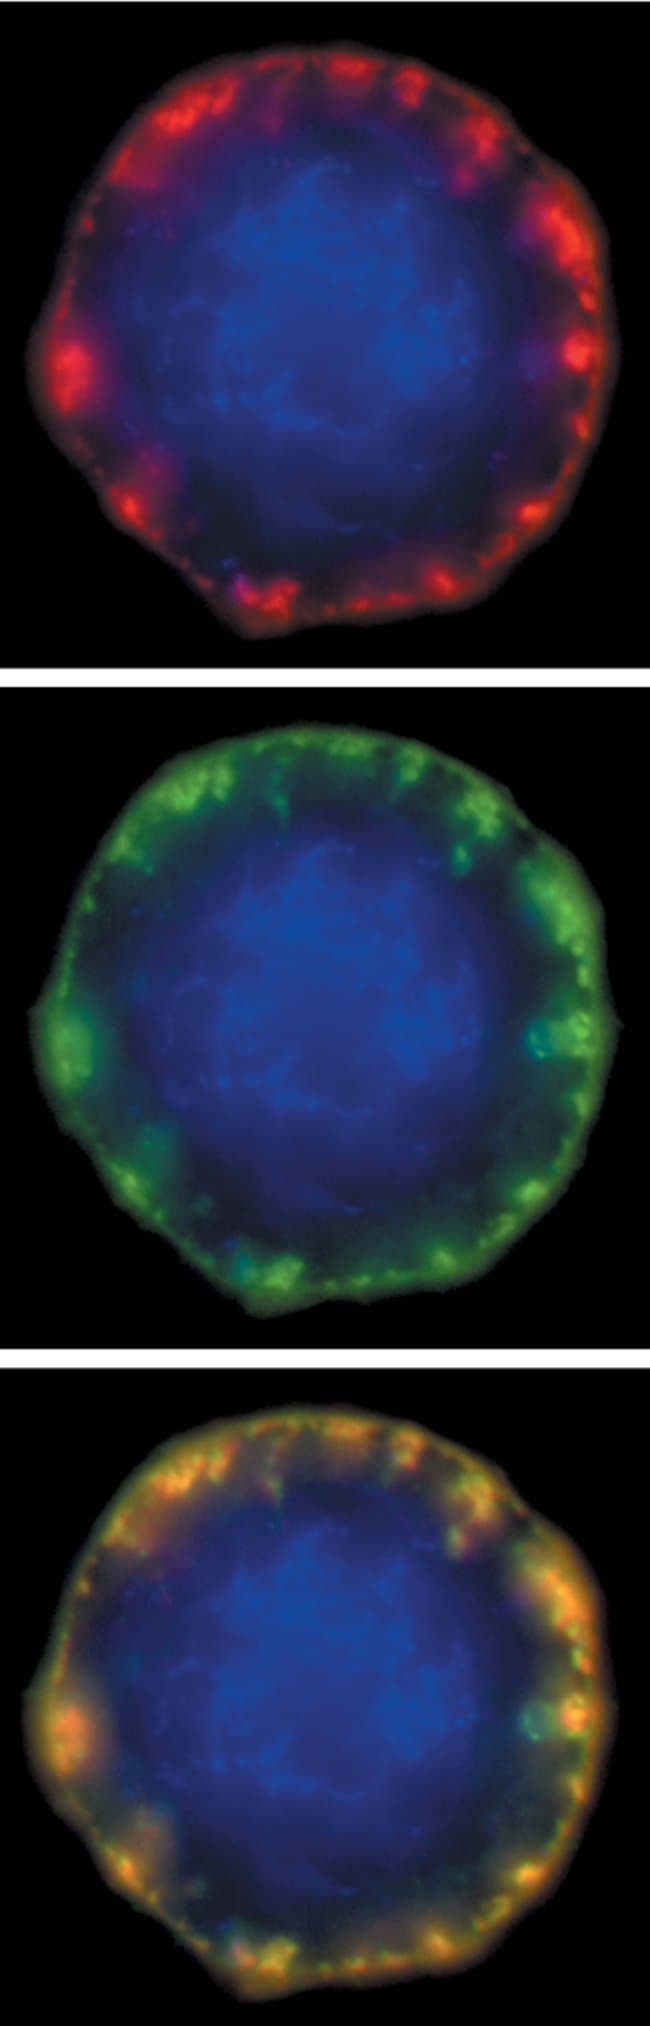 A J774 mouse macrophage cell stained with BODIPY® FL ganglioside GM1 (B13950) and Alexa Fluor® 555 dye–labeled cholera toxin subunit B.